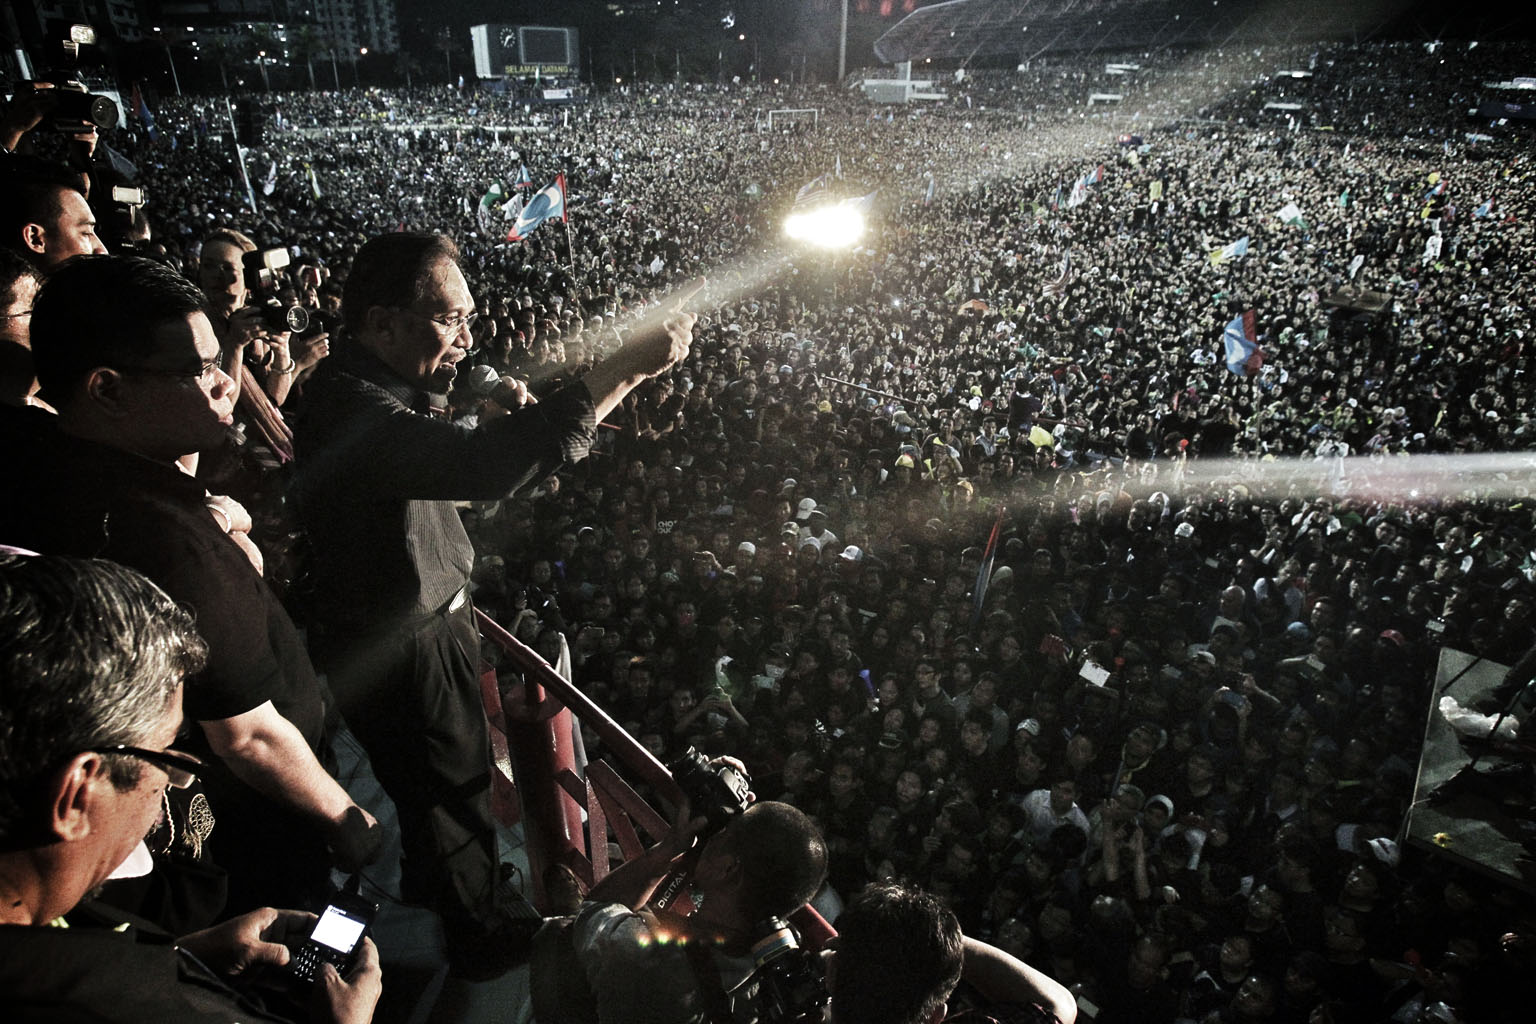 Malaysian opposition leader Anwar Ibrahim waves to his supporters during a rally at a stadium in Kelana Jaya, Selangor on May 8, 2013. Thousands of Malaysians dressed in mourning black gathered May 8 to denounce elections which they claim were stolen through fraud by the coalition that has ruled for 56 years. [Malaysia General Election 2013] Please note that this photo has never been used, so not a file photo.##########1##########KEVIN LIM